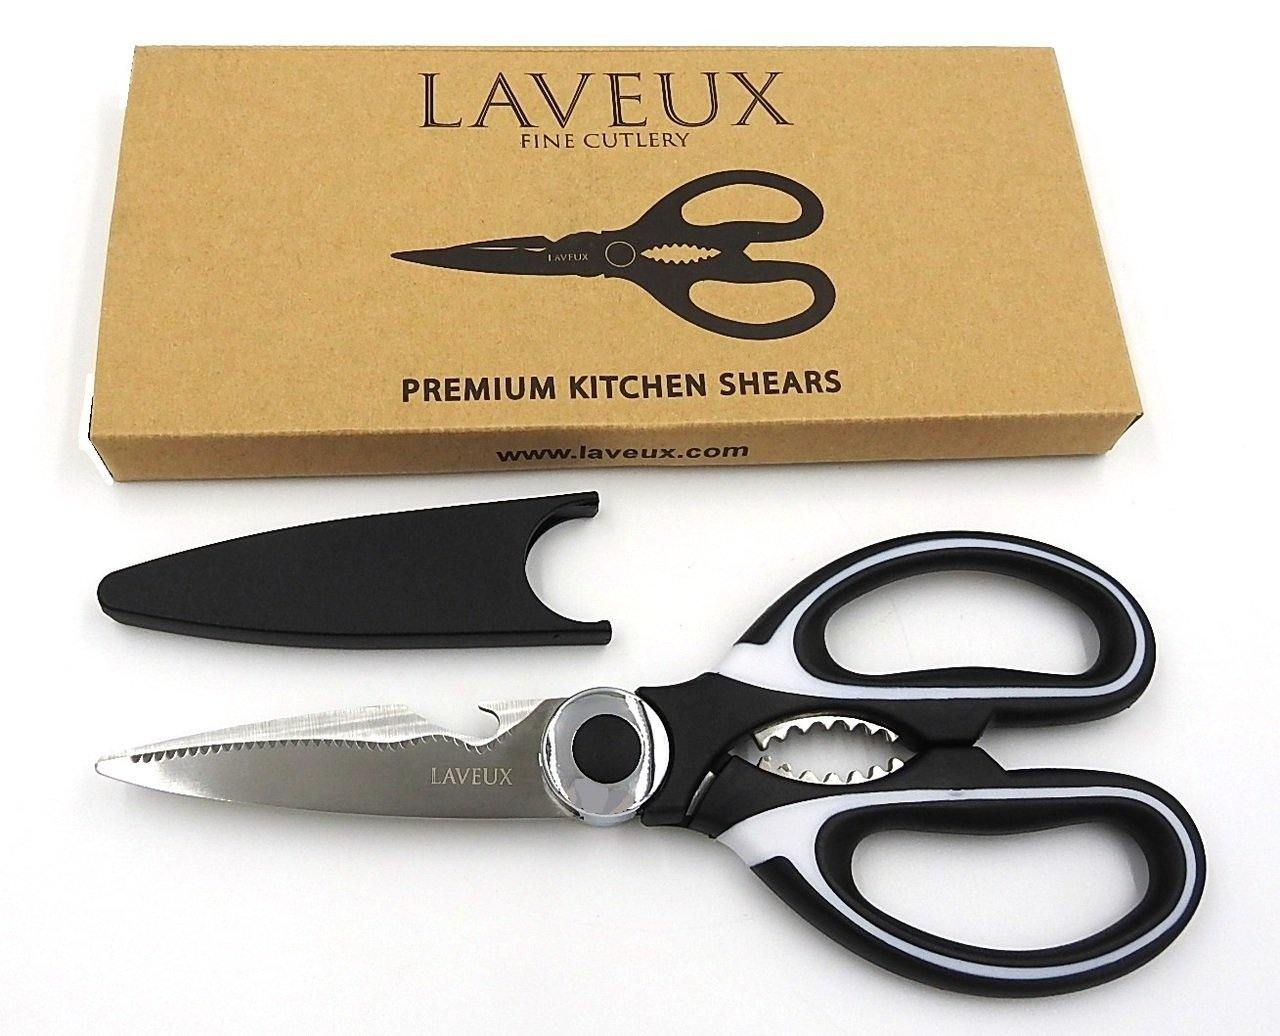 https://cdn.shopify.com/s/files/1/2809/4762/files/laveux-laveux-premium-kitchen-scissors-heavy-duty-shears-for-meat-poultry-fish-herbs-stainless-steel-with-bonus-blade-cover-ergonomic-handles-for-easy-comfortable-multi-purpose-cuttin_1600x.jpg?v=1685496069